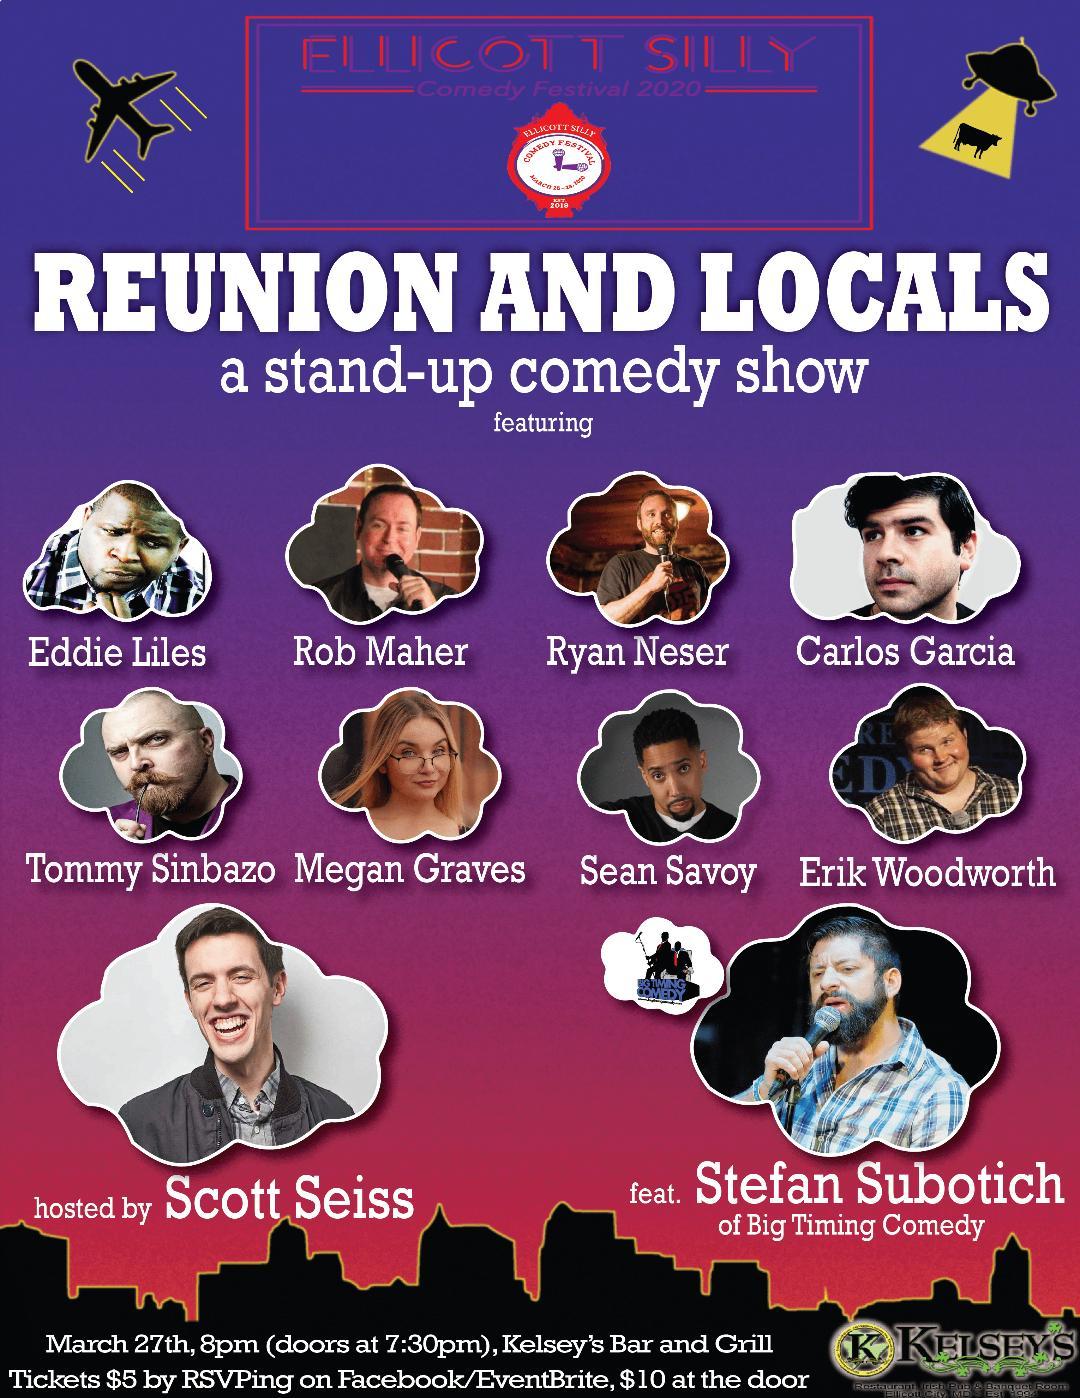 Ellicott Silly Comedy Festival “Reunion & Locals” Stand Up Comedy Showcase